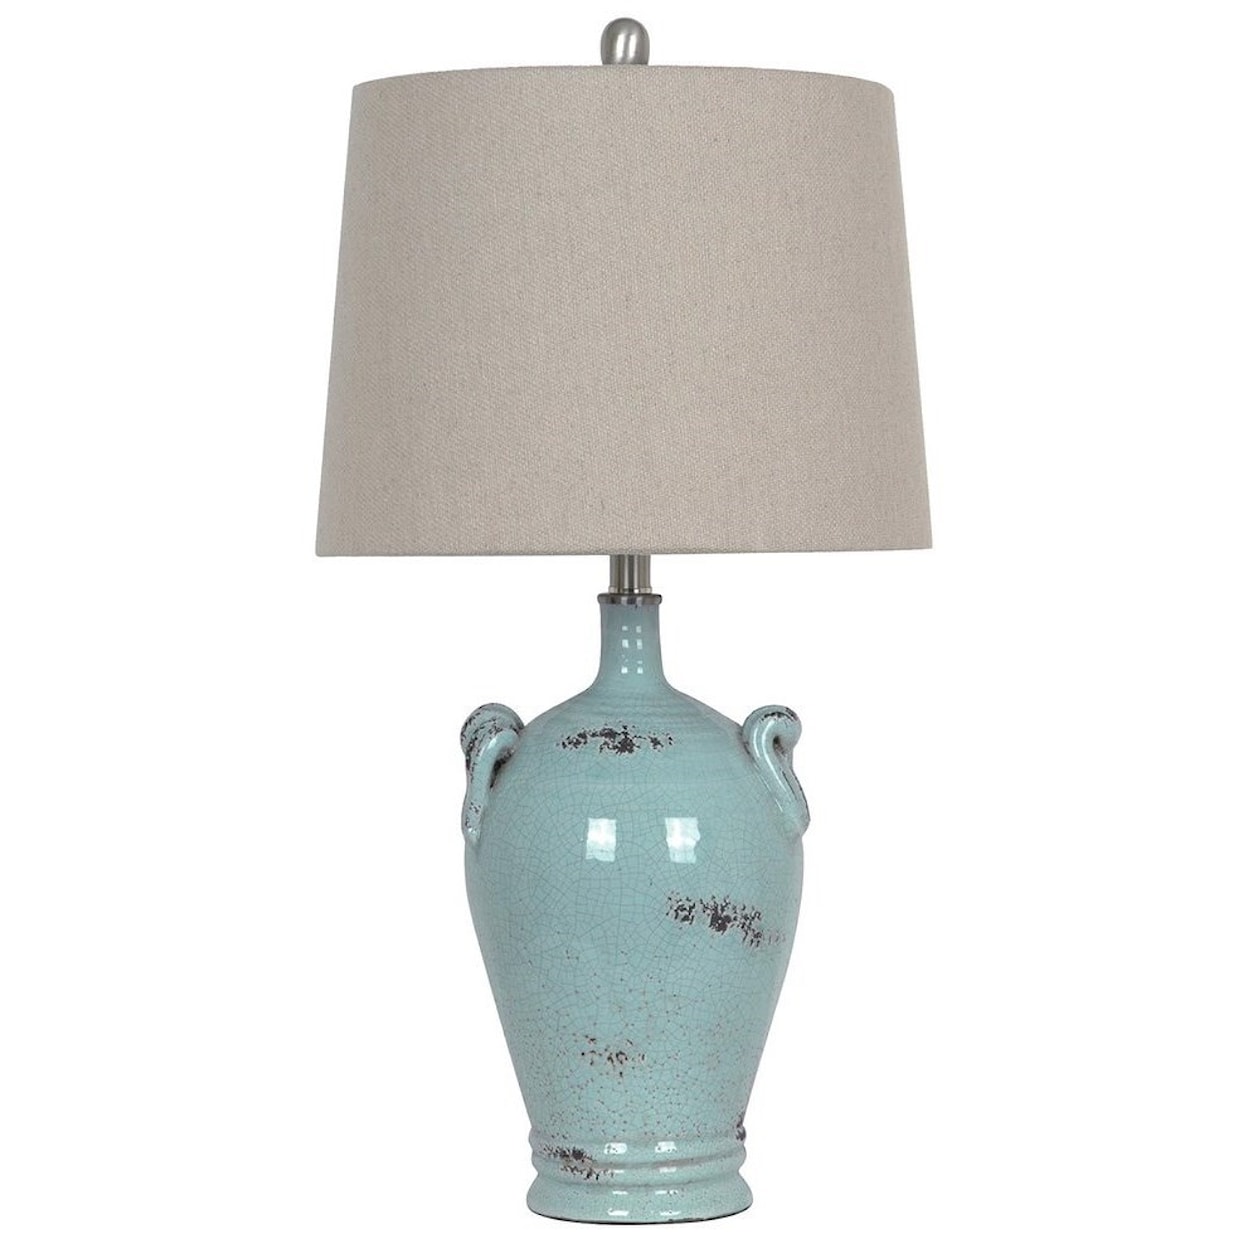 Crestview Collection Lighting Casa Table Lamp